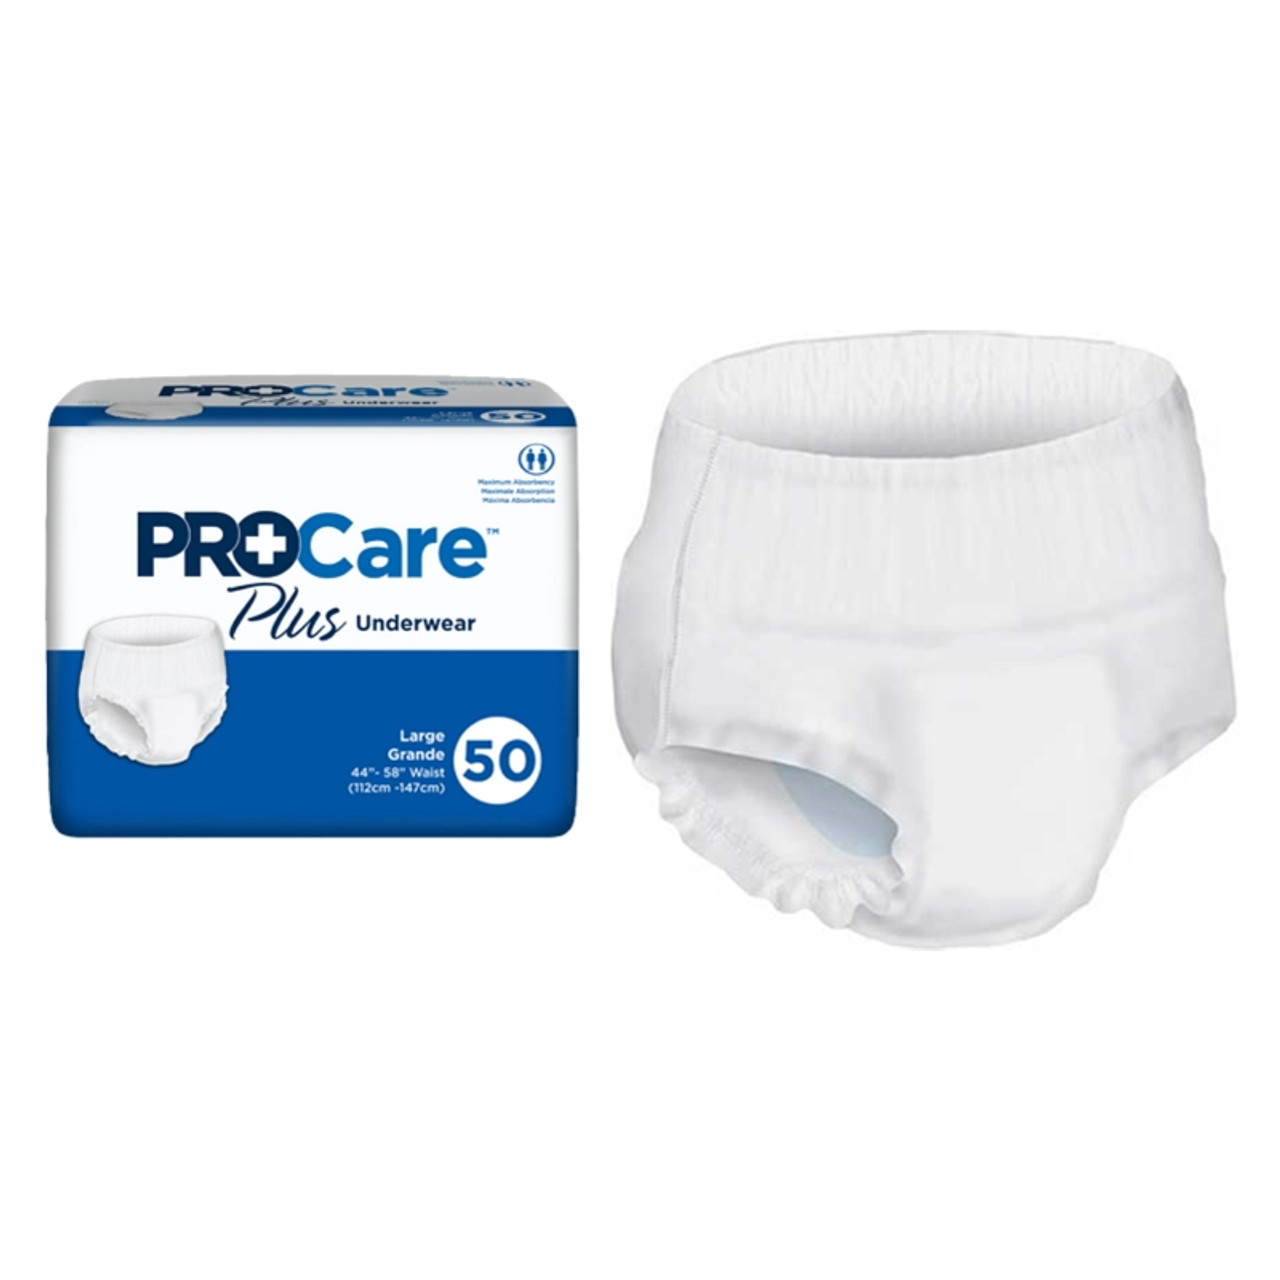 First Quality CRP-513 - PROCare Plus Protective Underwear, Large, 44 - 58